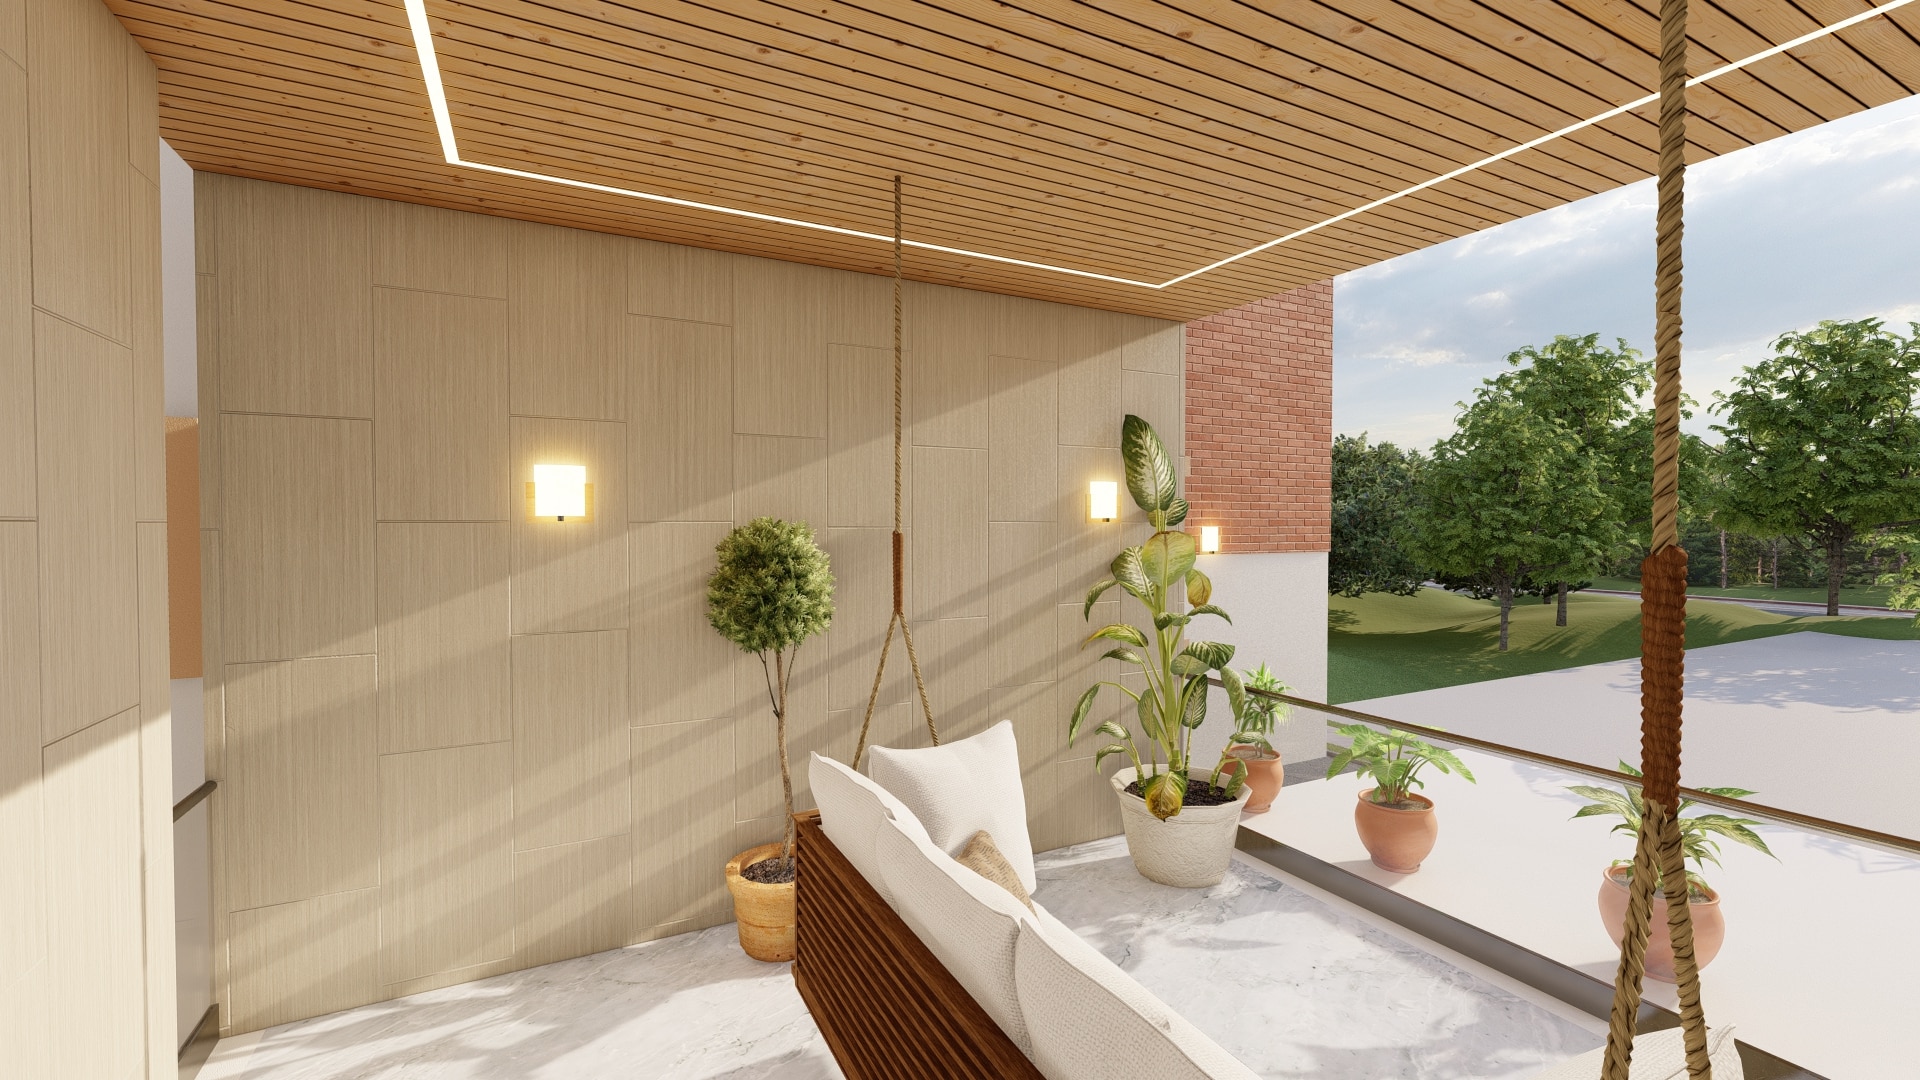 luxury bungalow home design covered terrace deck east facing 1500 ft by urban terrace